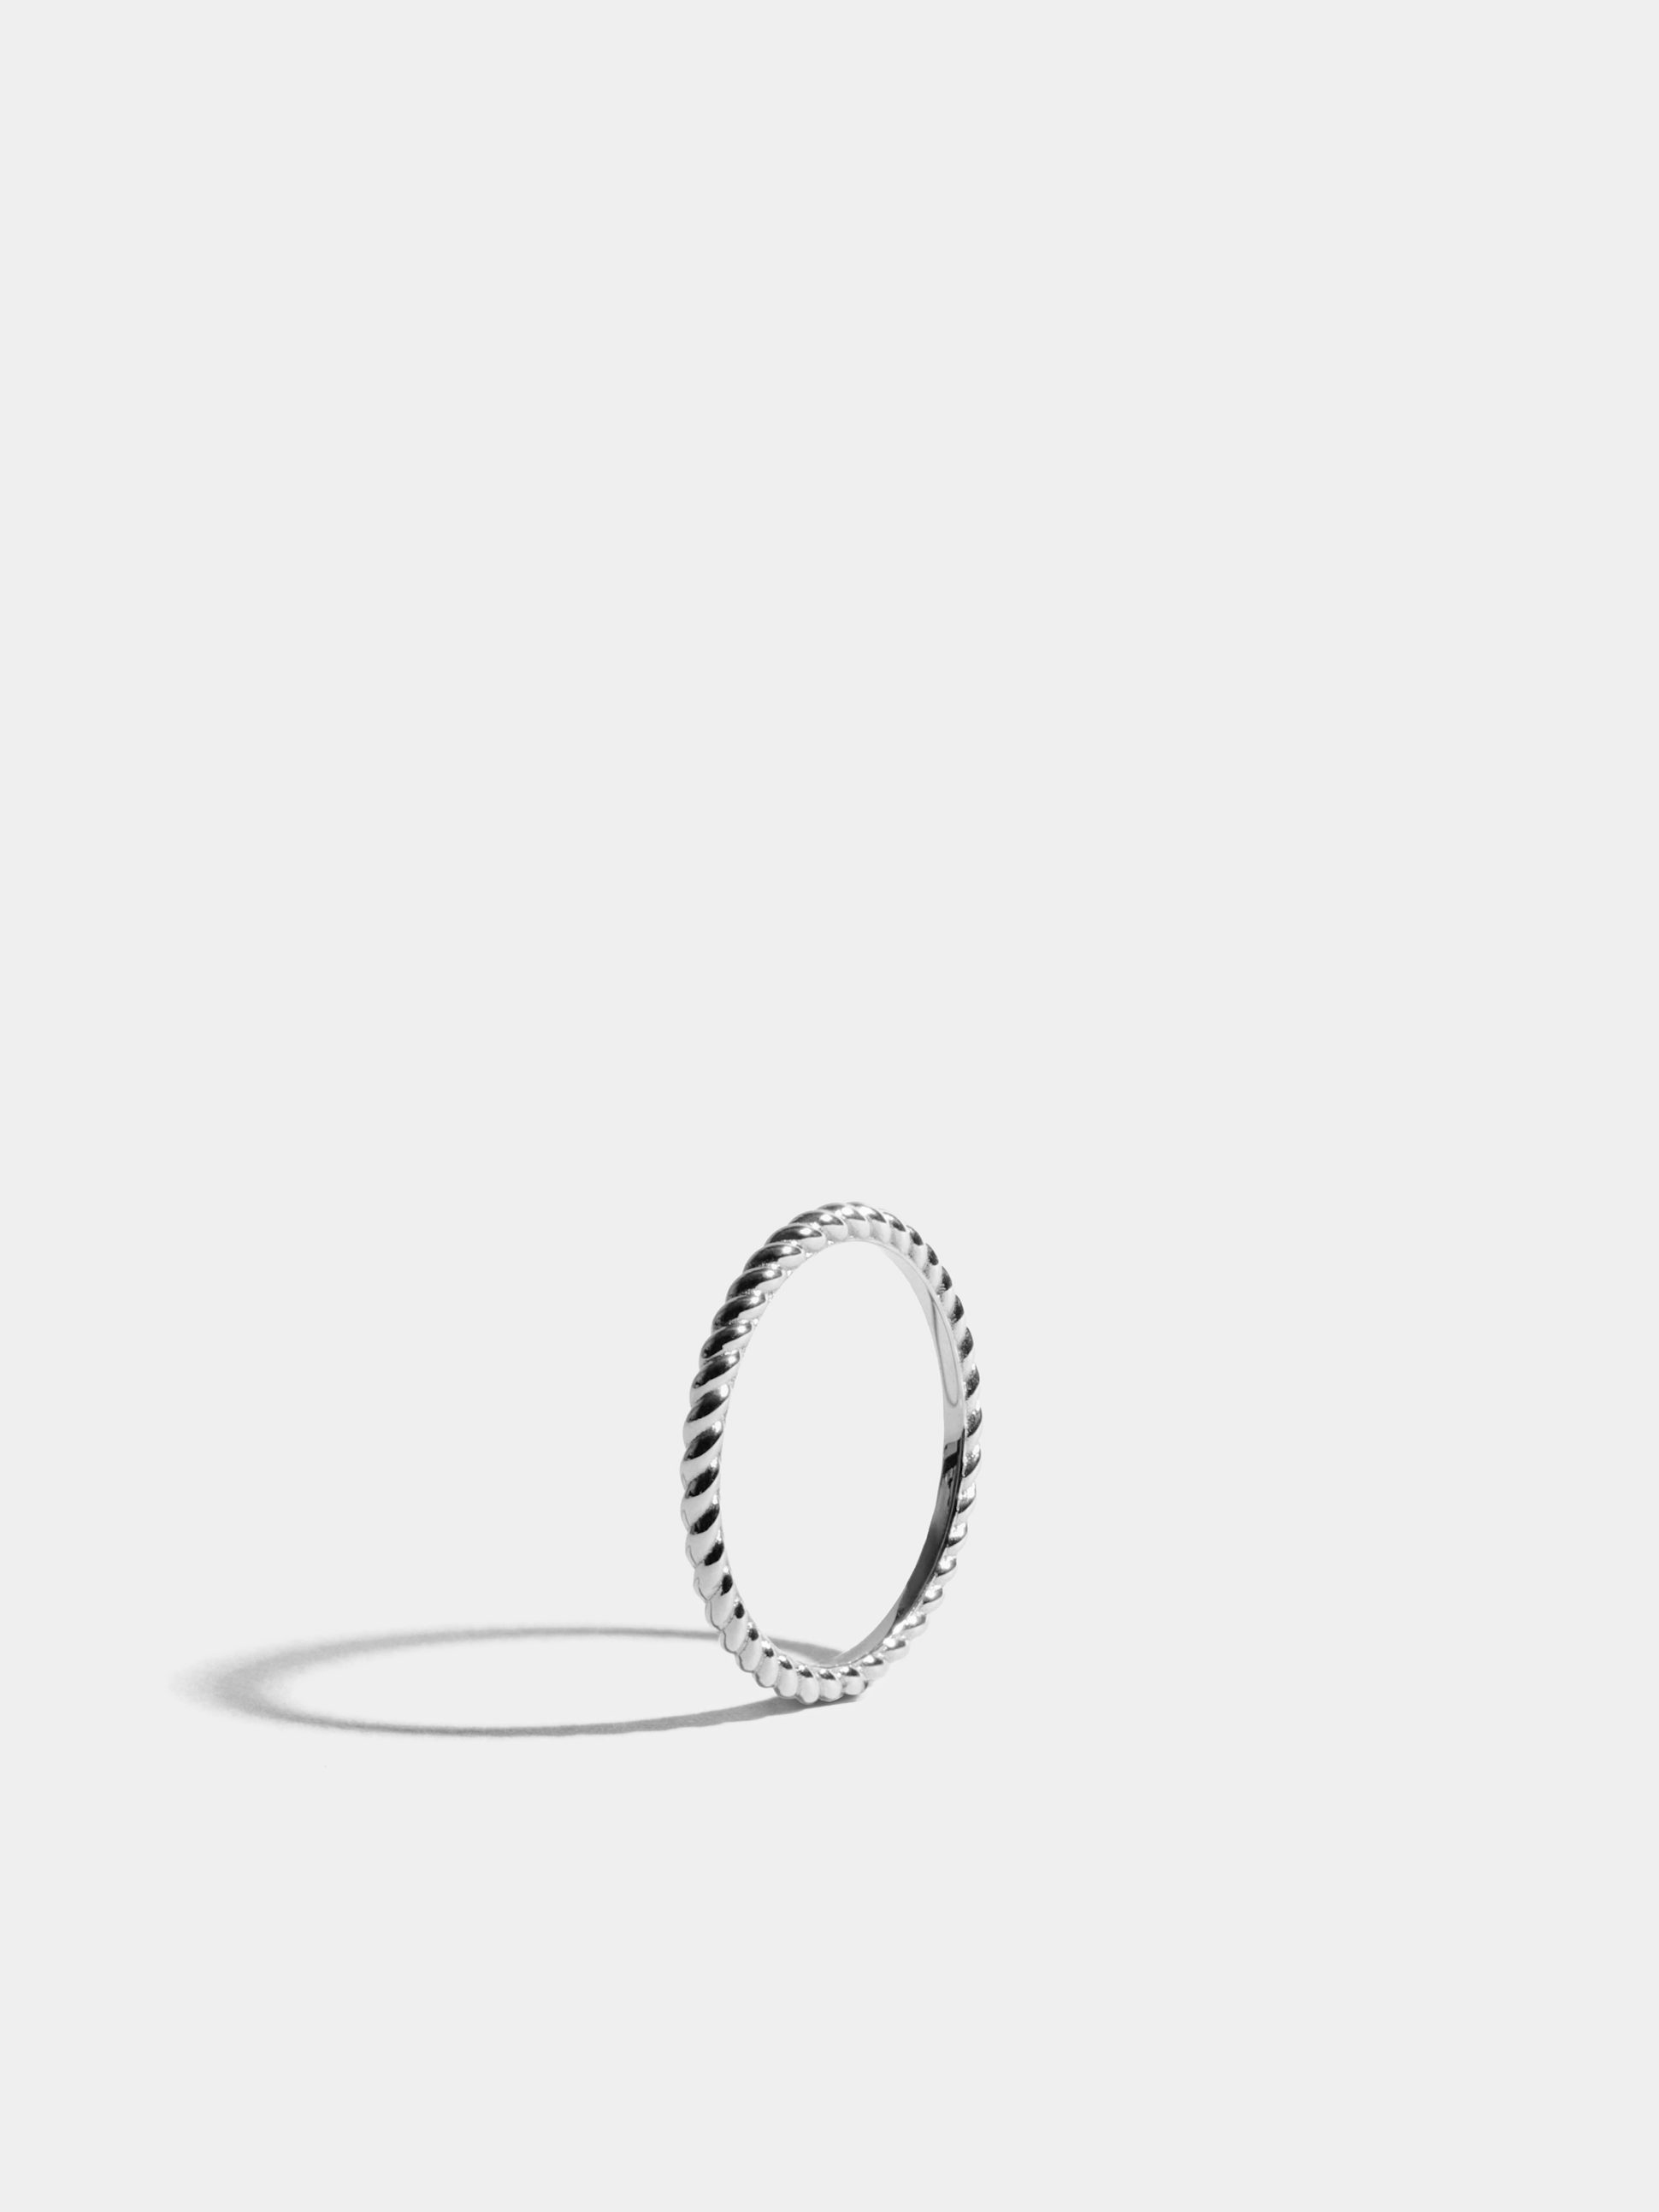 Ring Anagramme twisted in white gold 18k Fairmined ethical